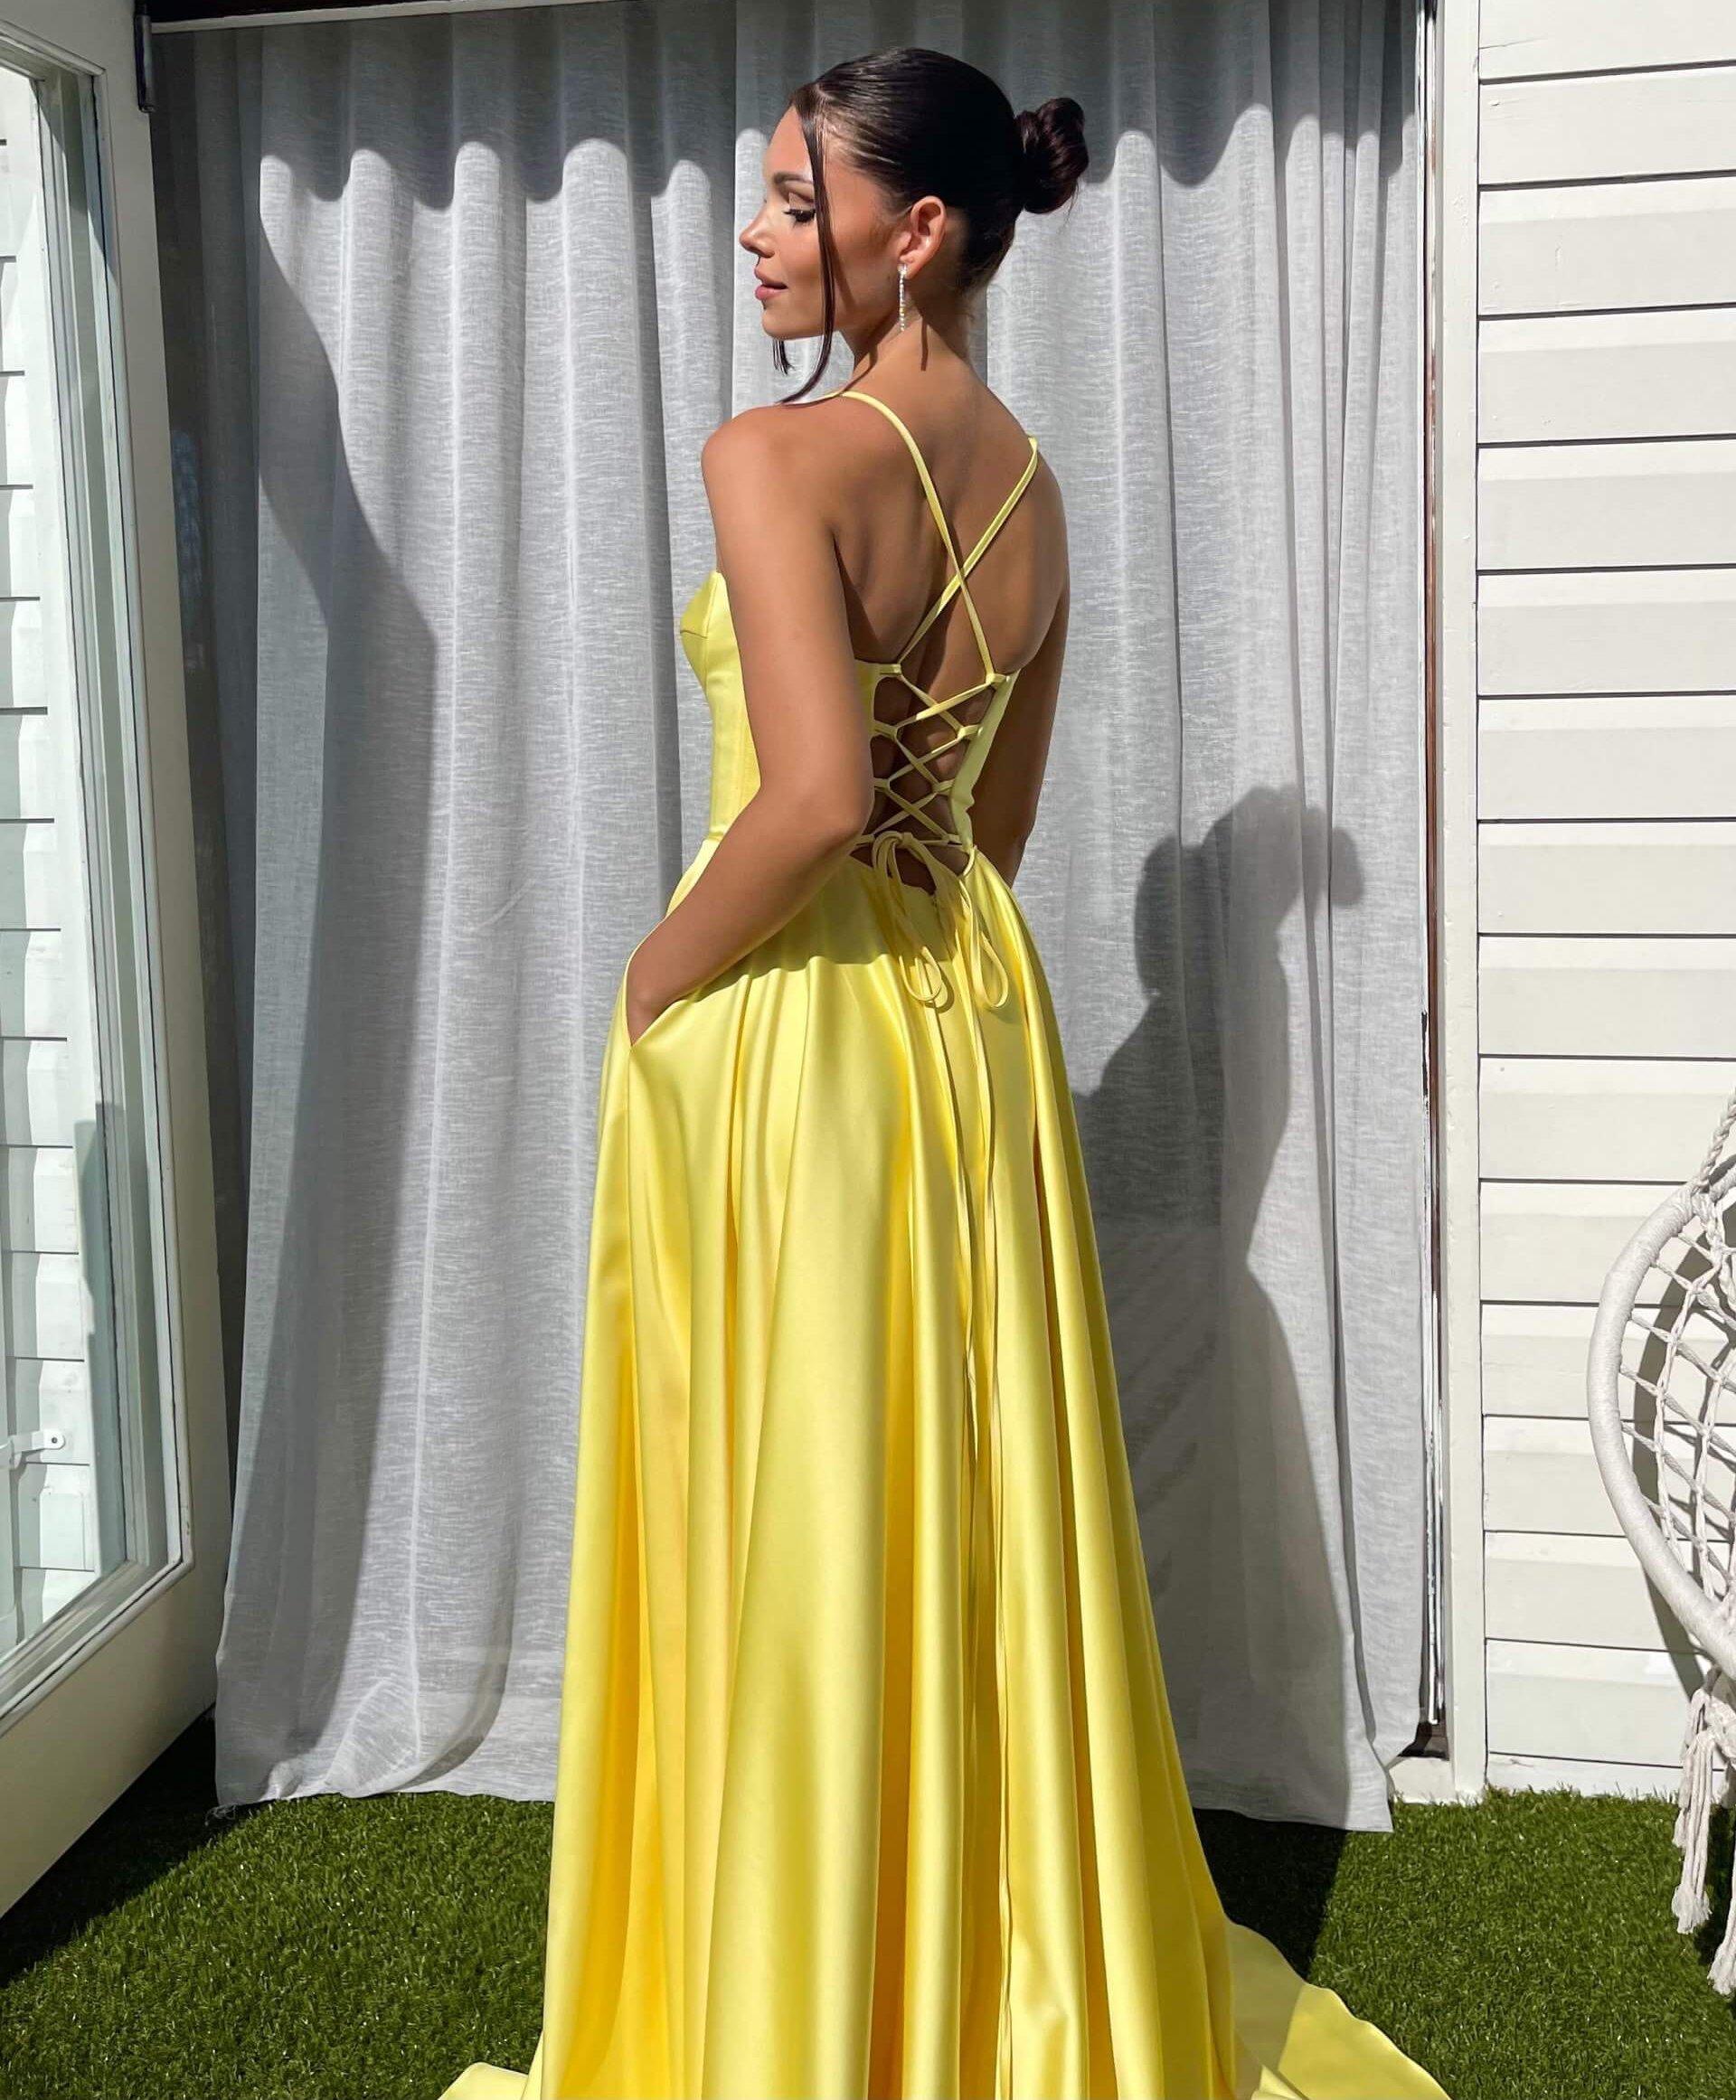 Smiling Woman in a Yellow Ball Gown · Free Stock Photo